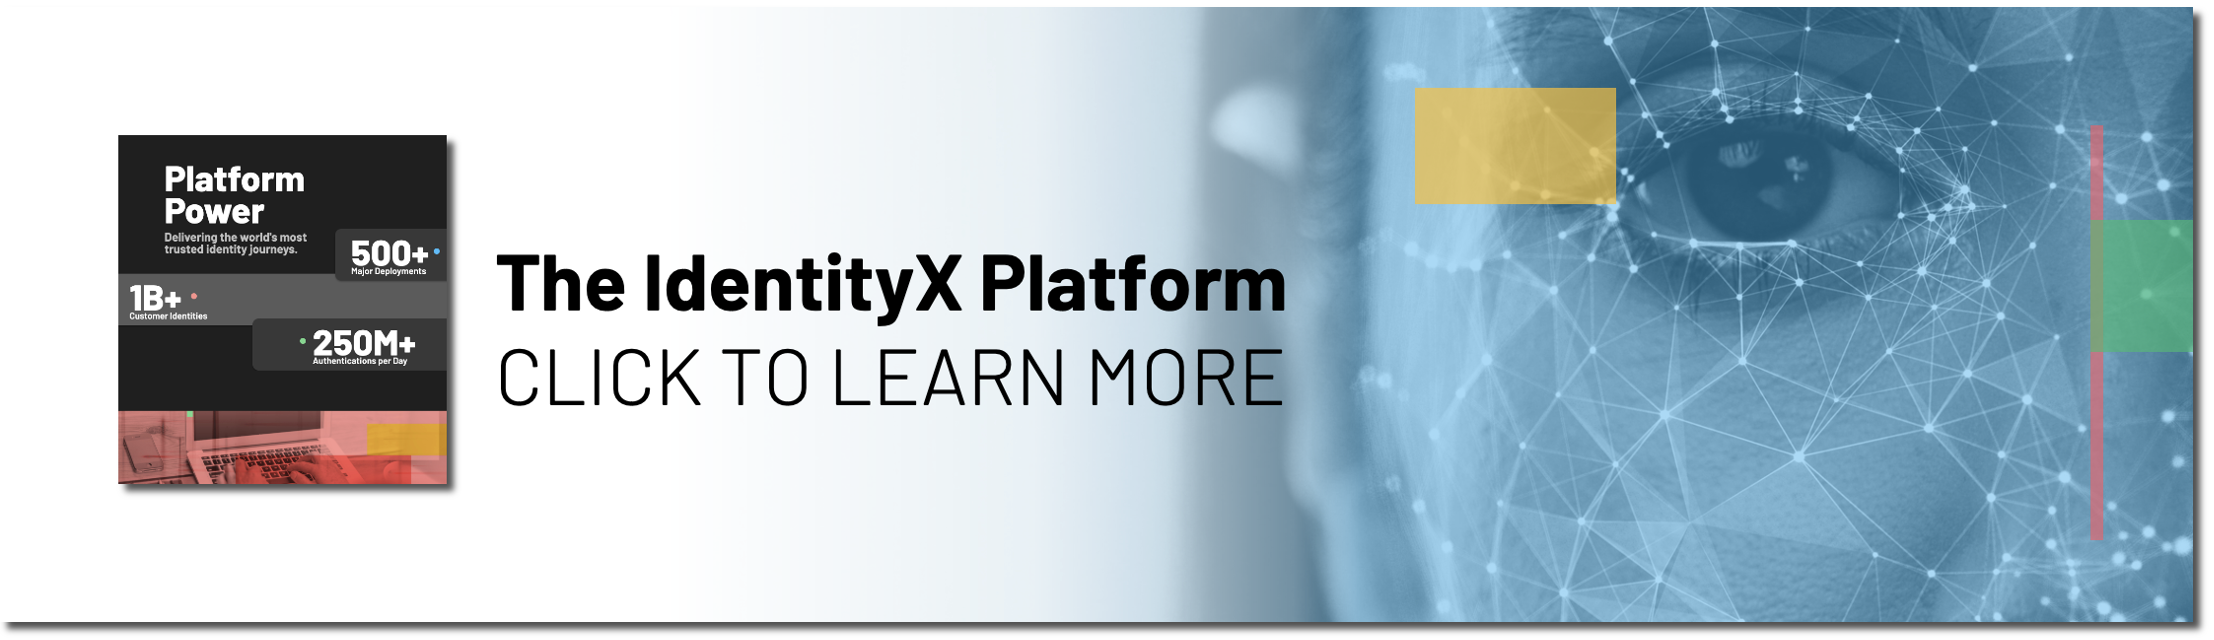 IdentityX Platform: Click to Learn More